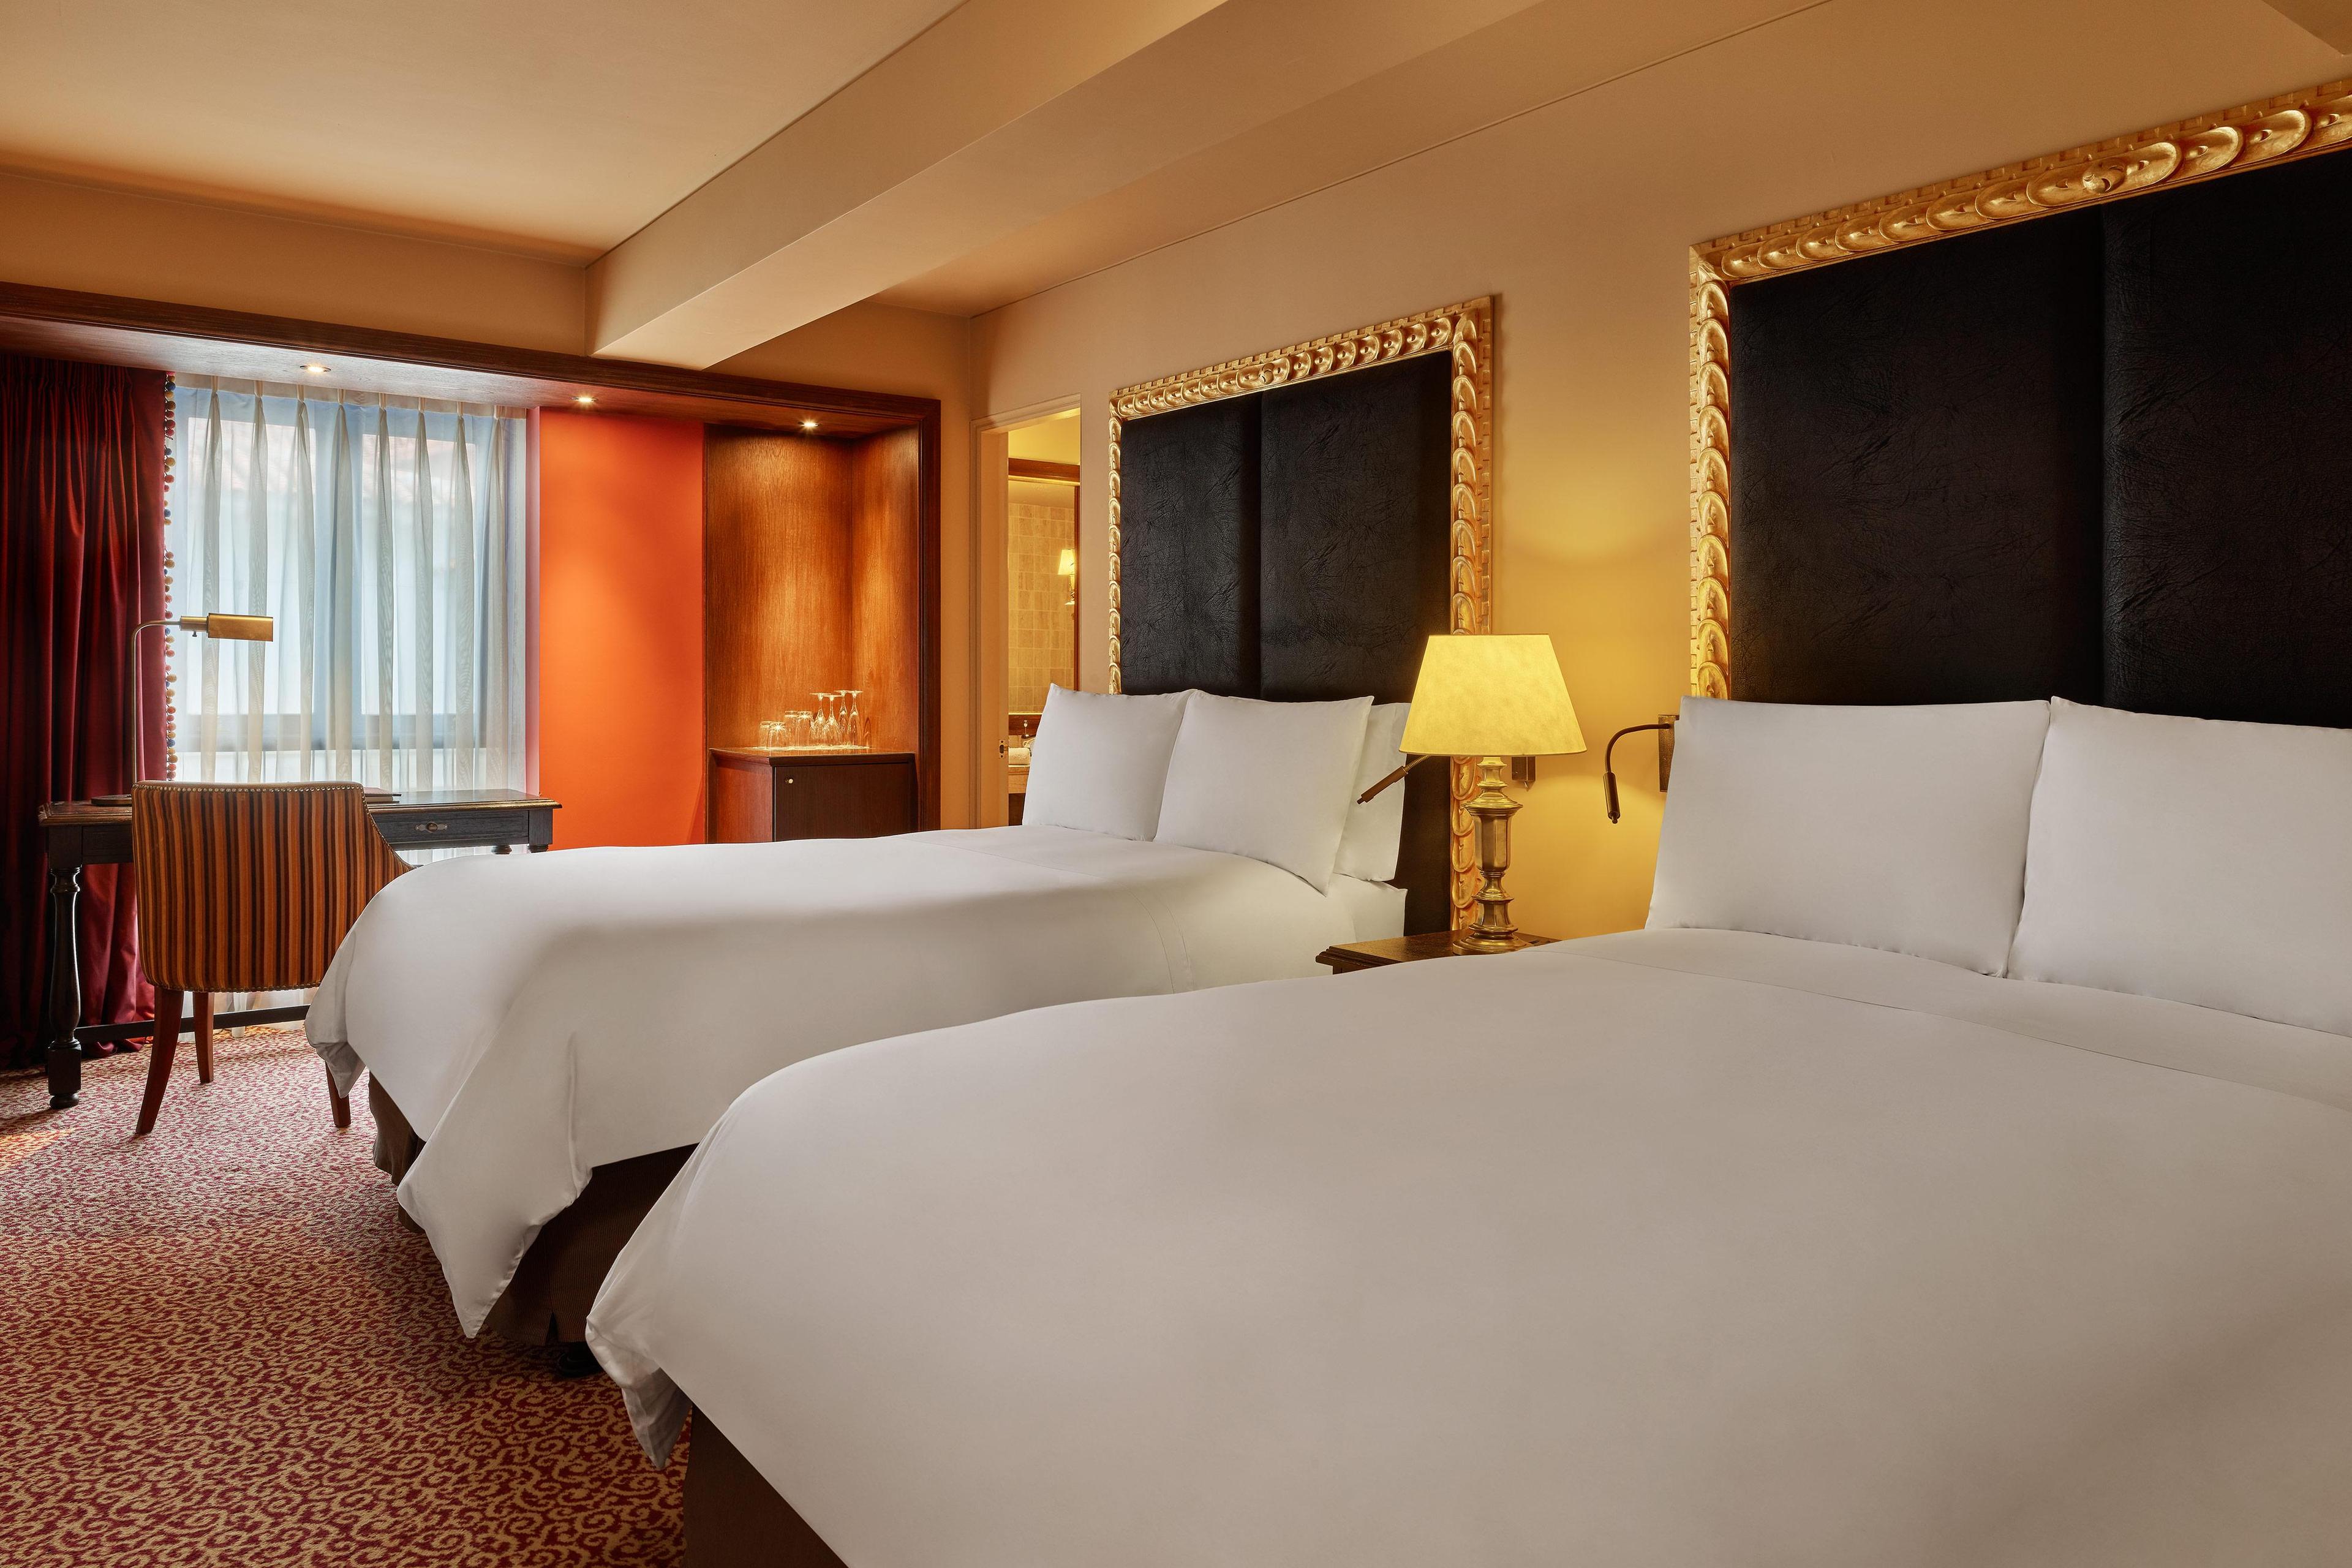 Enjoy spacious accommodations for up to 4 guests in our Premium Guest Rooms with two twin beds.